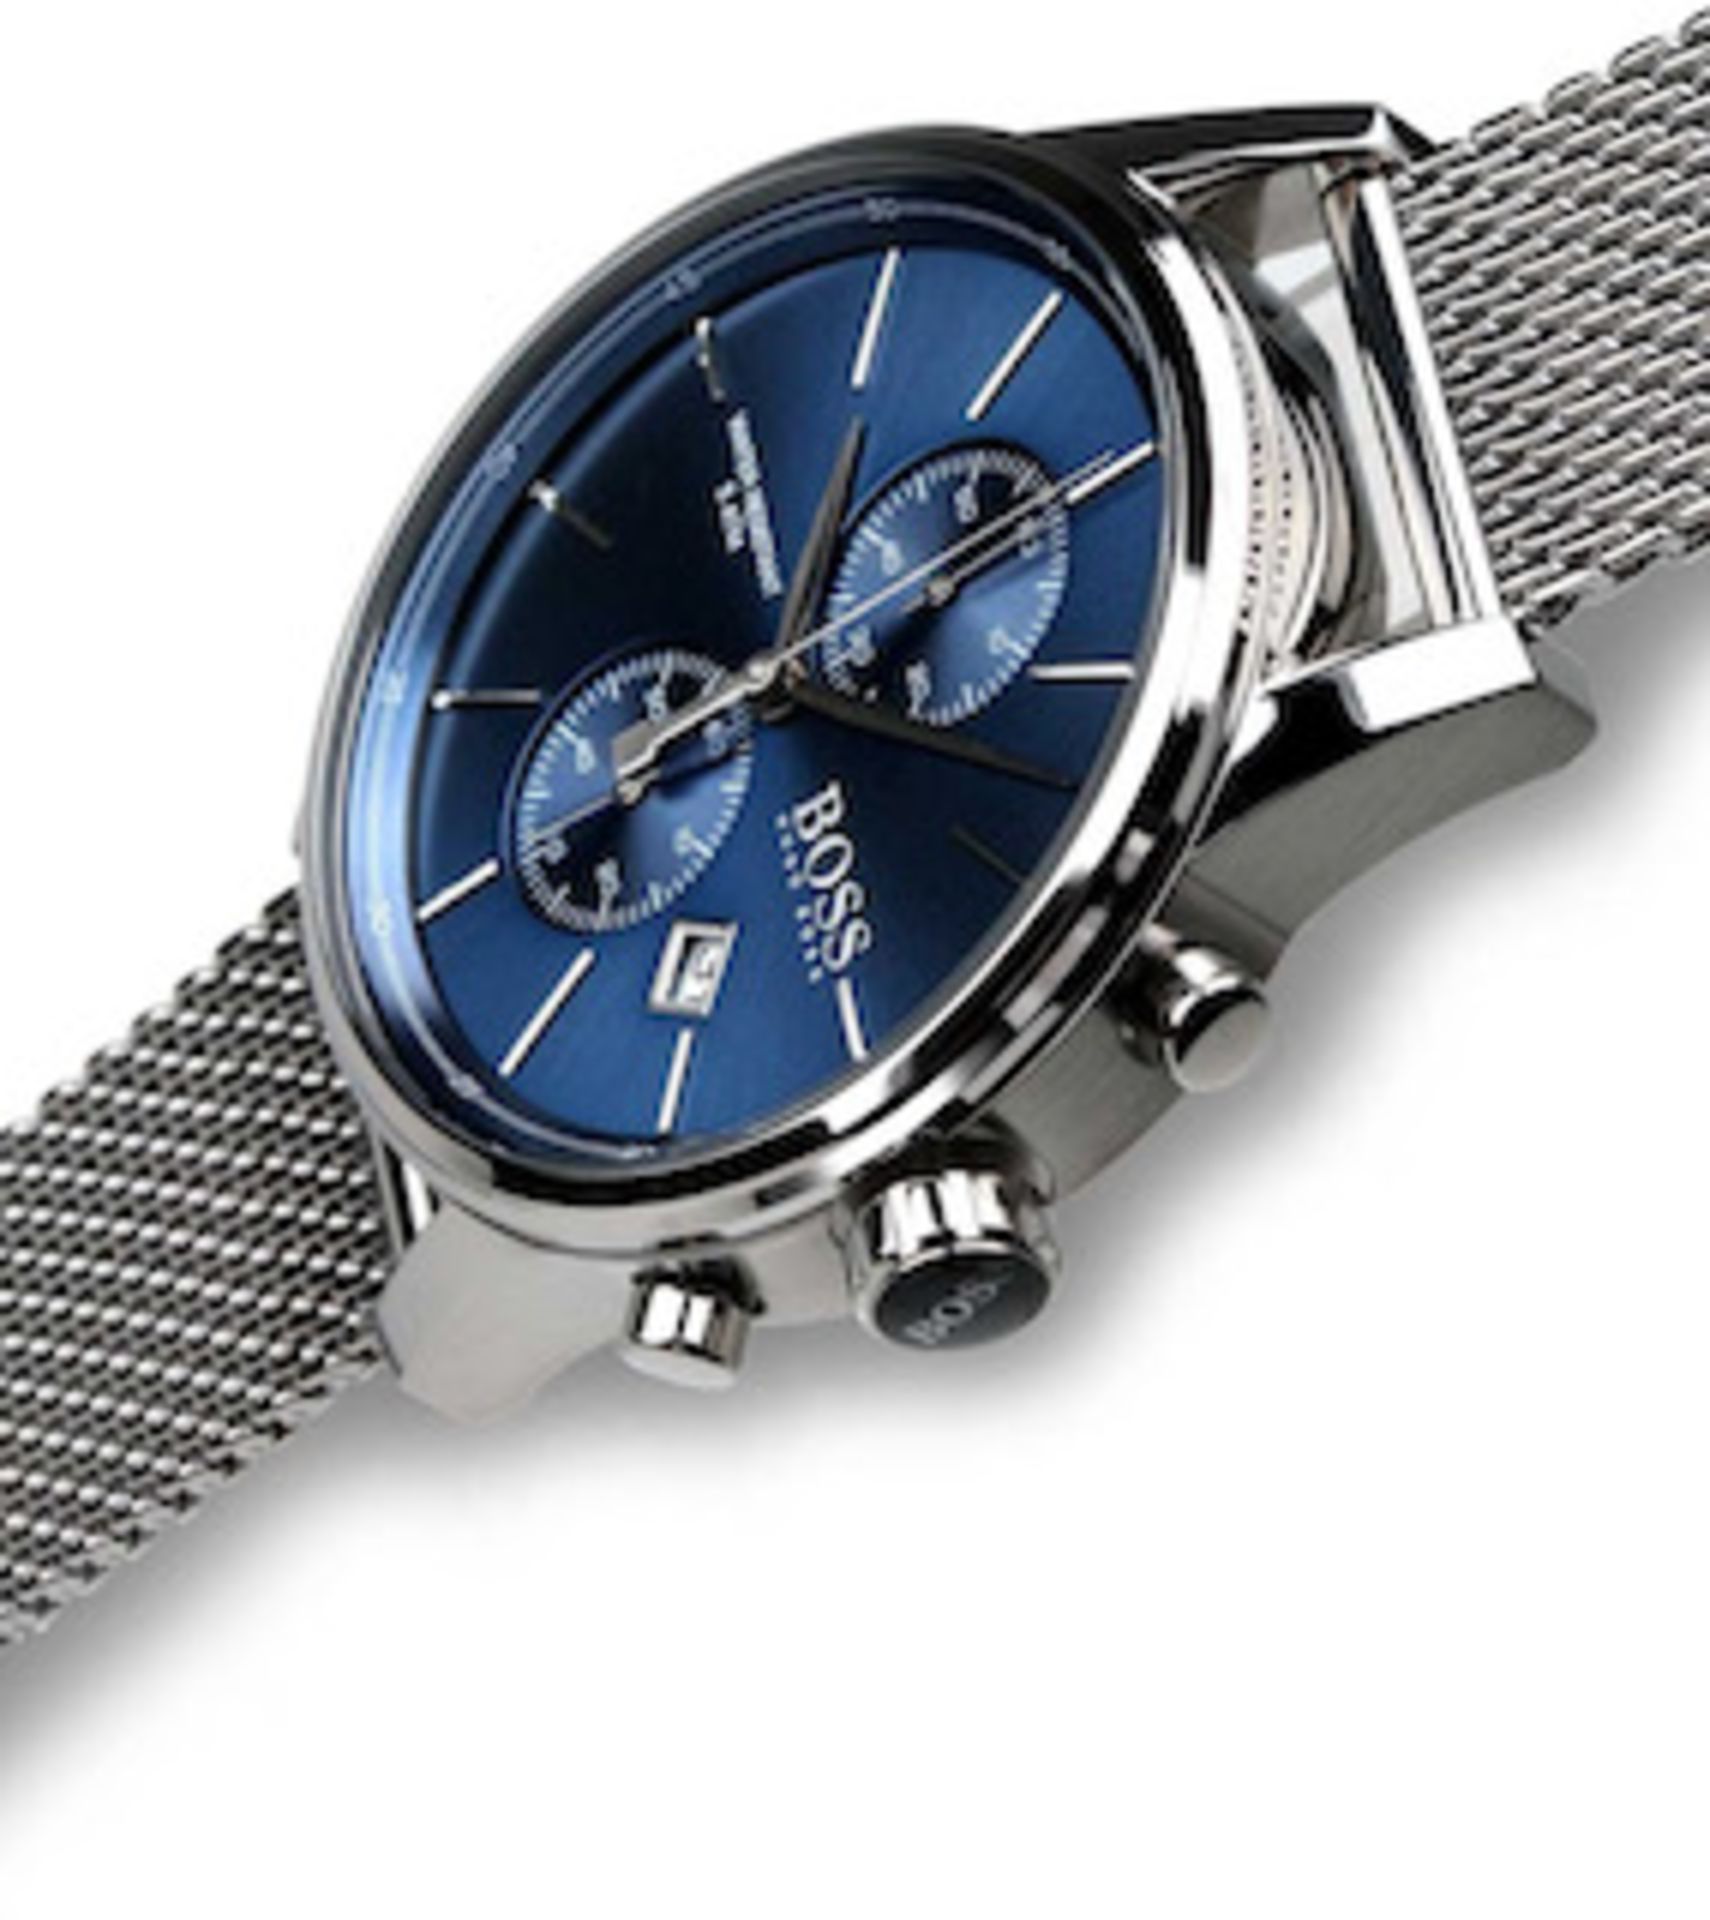 Hugo Boss 1513441 Men's Jet Blue Dial Silver Mesh Band Chronograph Watch - Image 2 of 5